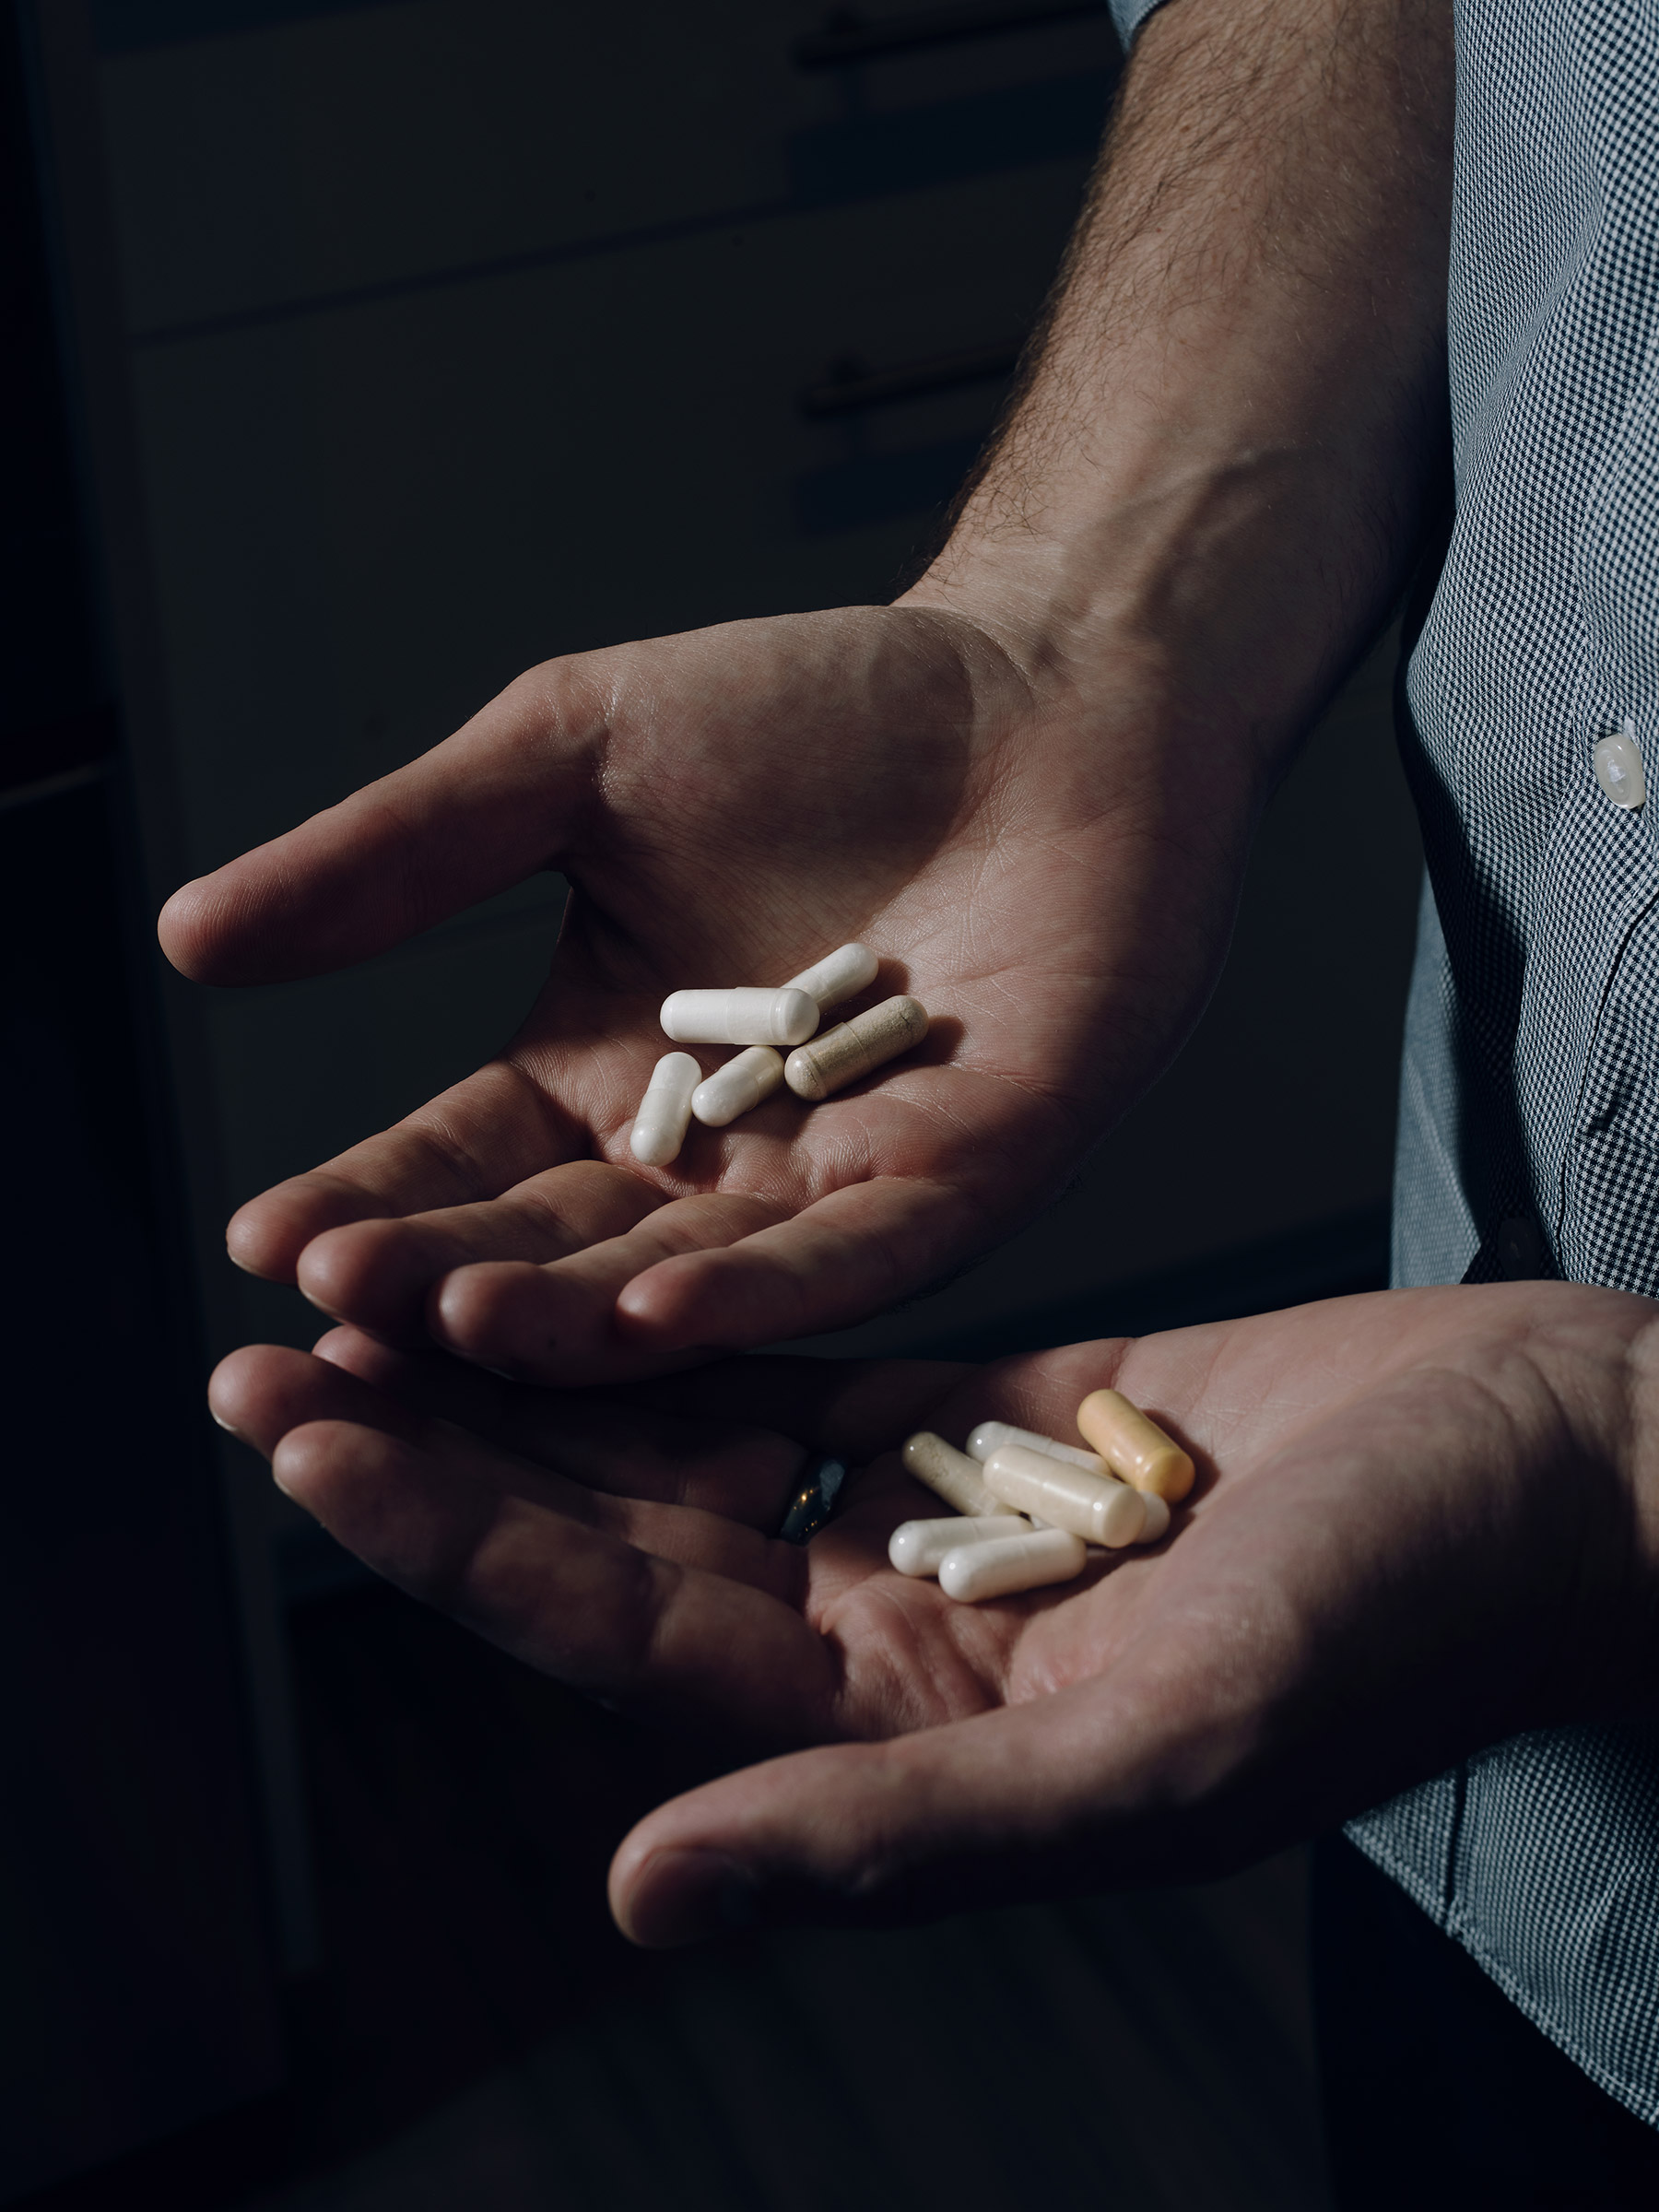 To keep his blood lead levels low, Virginia Tech shooting survivor Colin Goddard has to swallow 31 pills a day as part of his chelation treatment, a chemical process used to rid the body of excess or toxic metals. (Bryan Thomas for TIME)